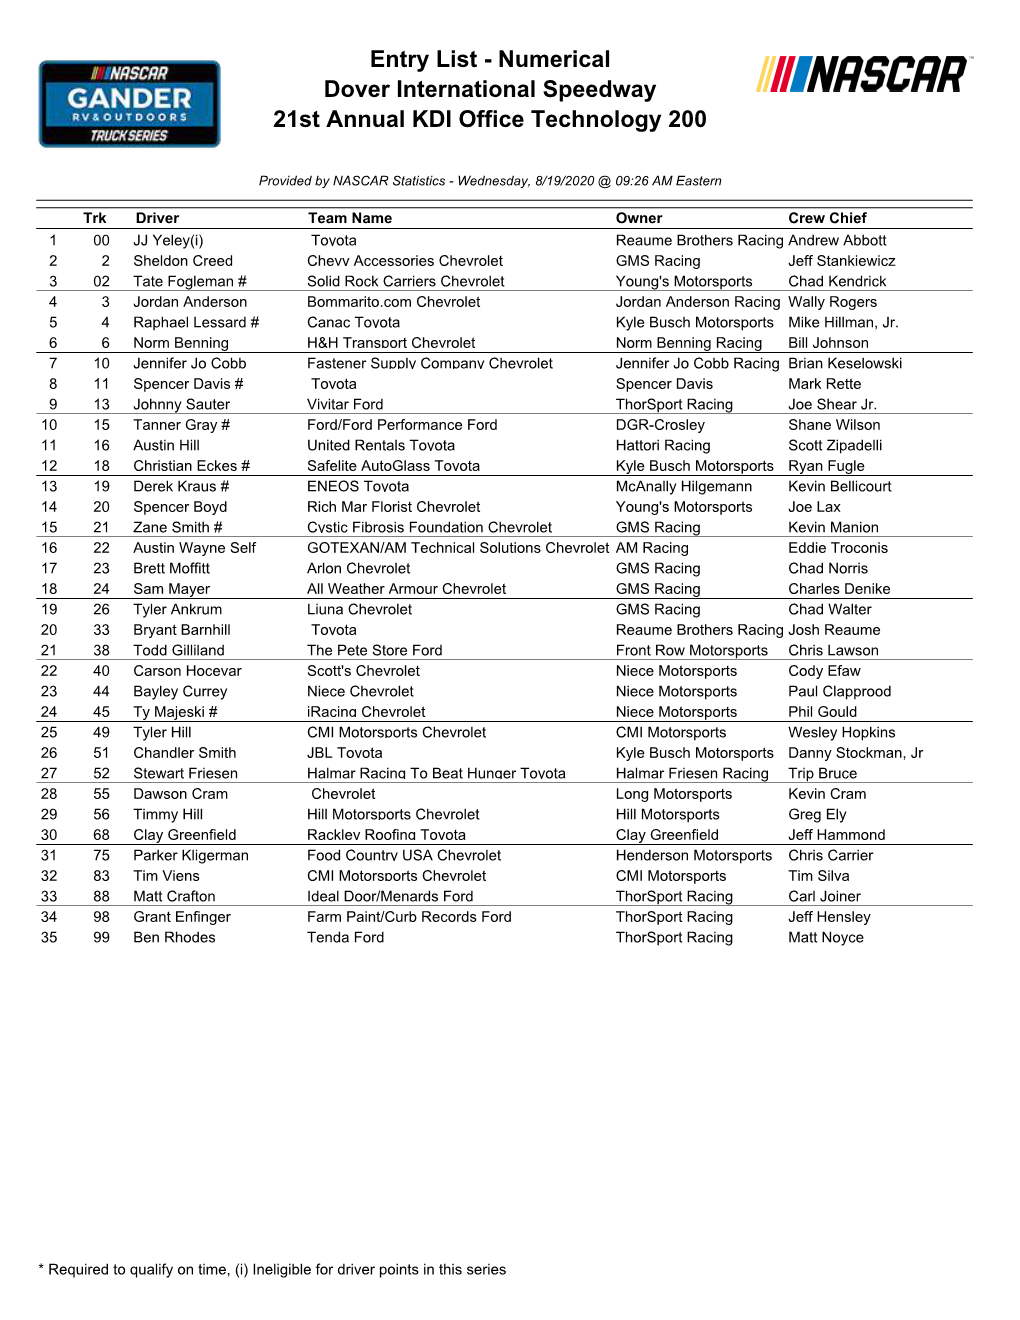 Entry List - Numerical Dover International Speedway 21St Annual KDI Office Technology 200